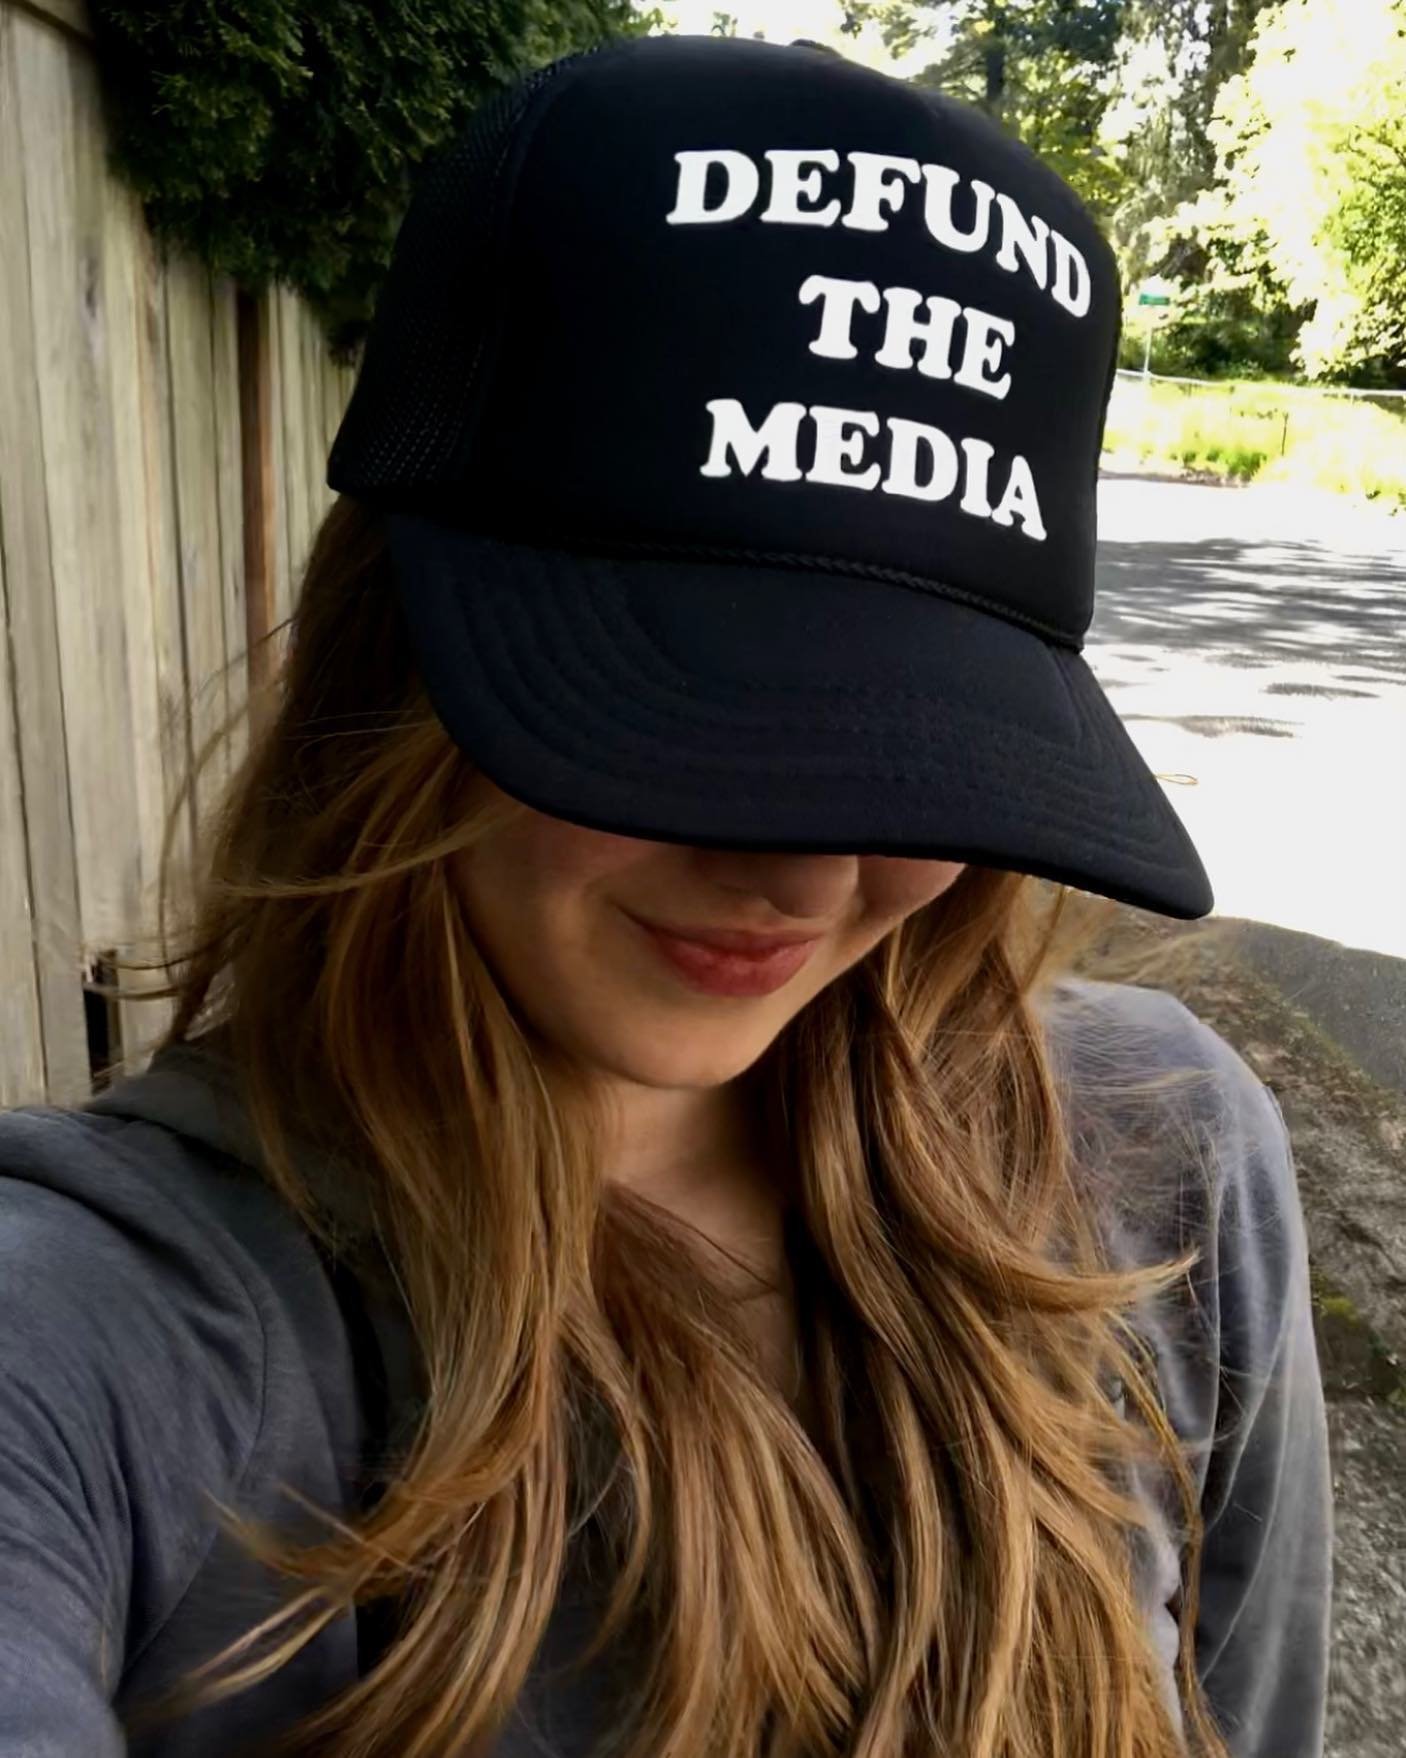 Hat of the day for a walk to the grocery. Not everyone likes this hat but I love it and I got a big grin from the man at the meat counter 😄

Hat from:  @maidennewyorkla 

#defundthemedia #conservative #thinkforyourself #speaktruth #themedialies #doy